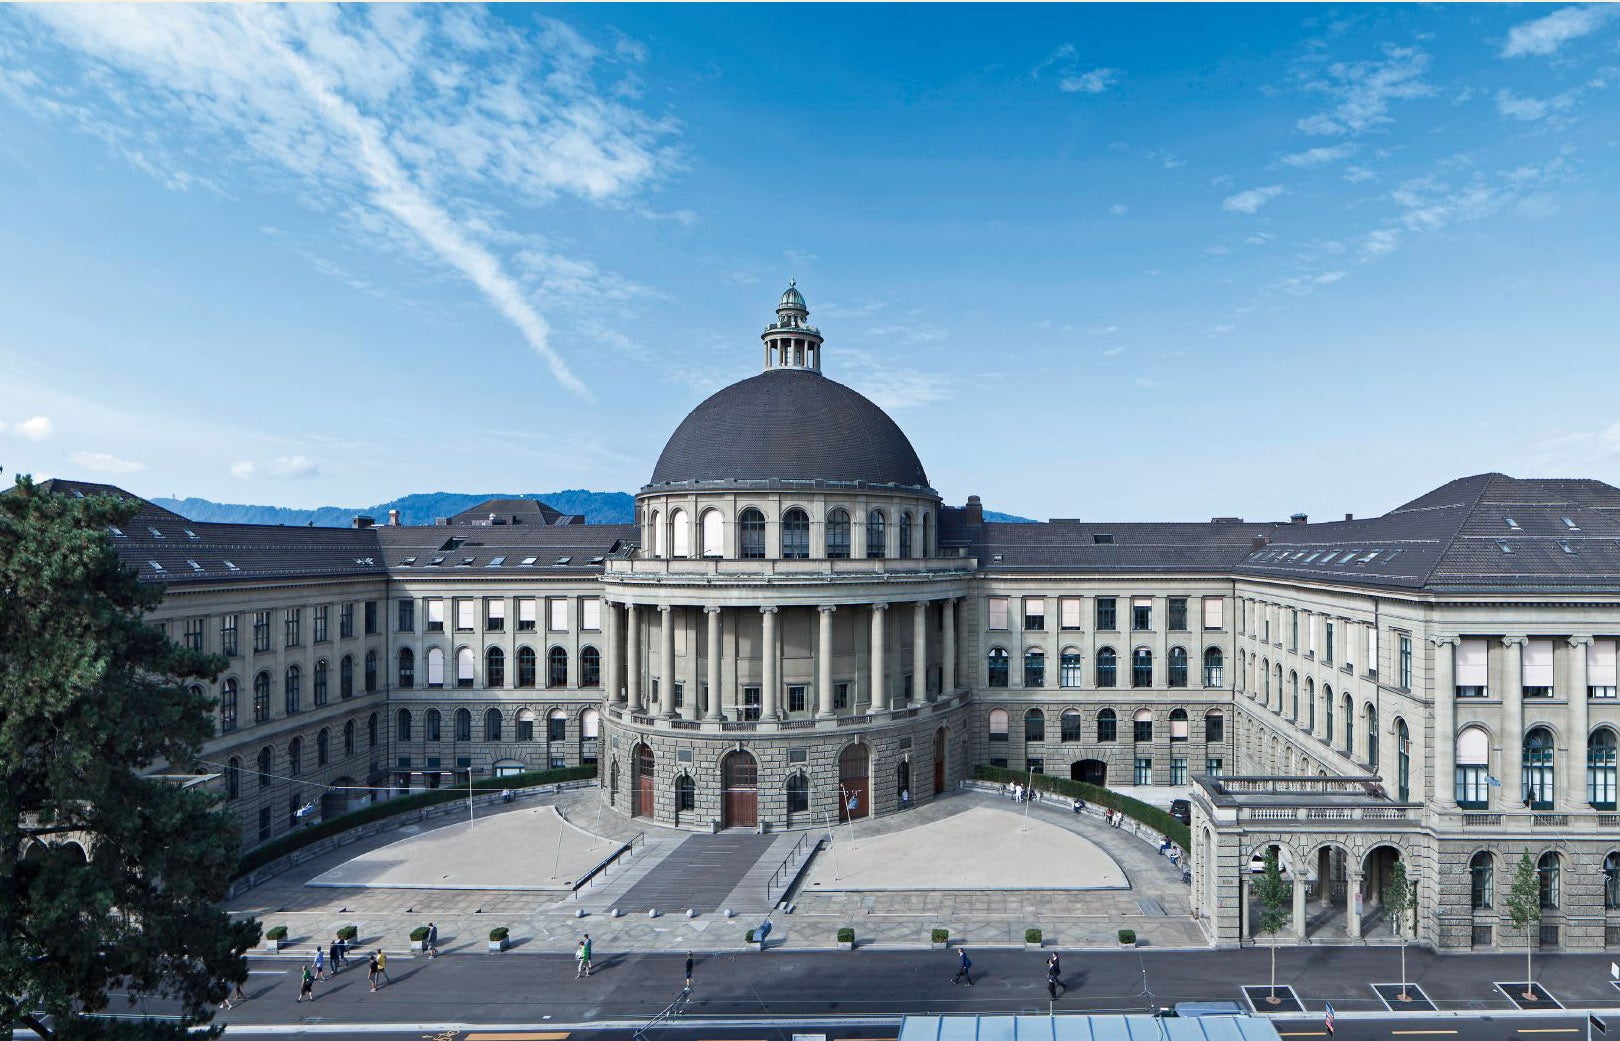 Switzerland's ETH Zürich has risen four spots to ninth place on last year